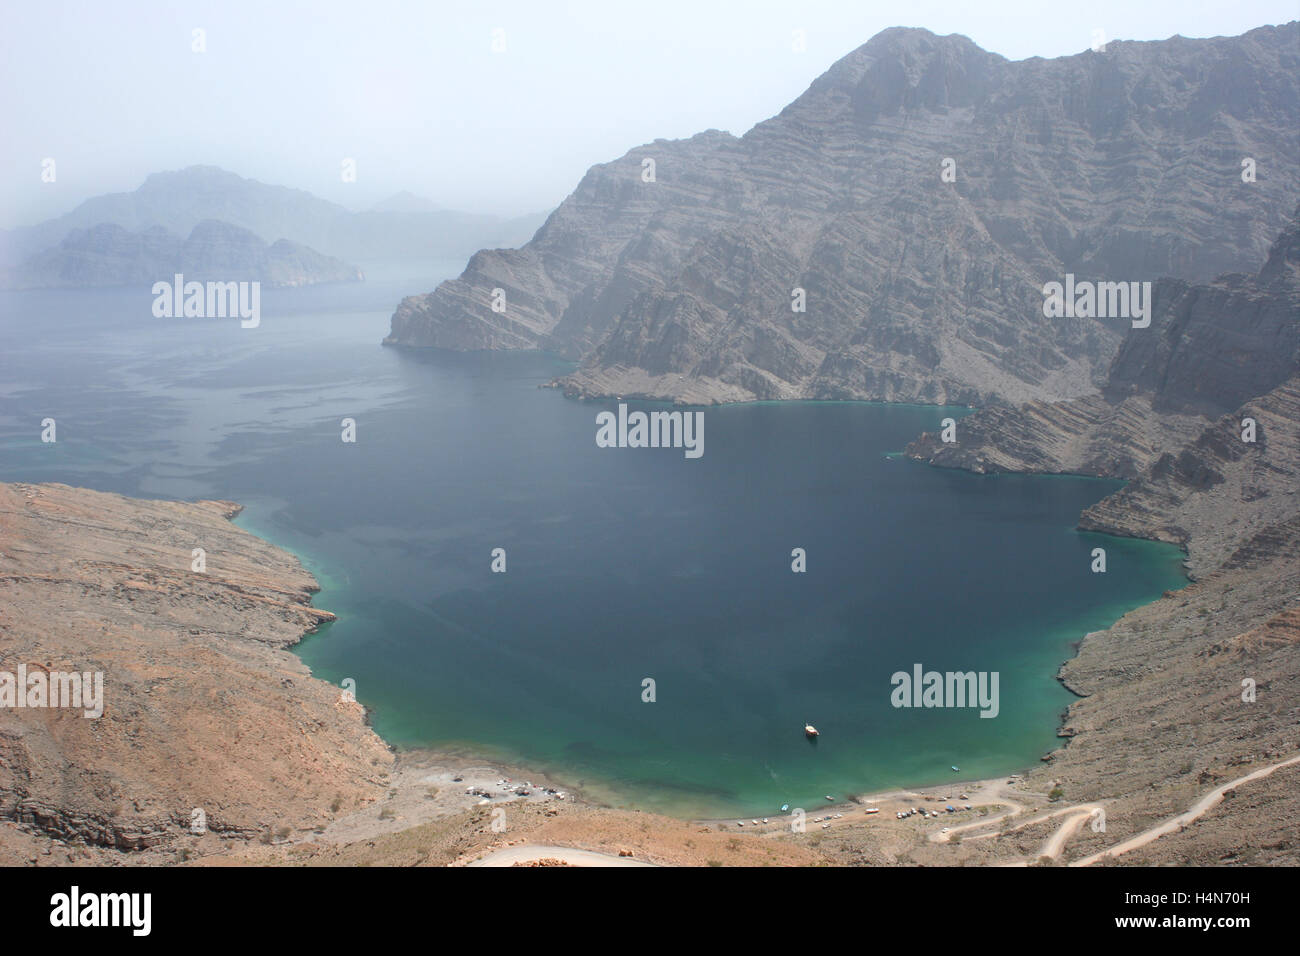 The wild landscape of the Musandam Peninsular at Khor an Najd in northern Oman.  A single dhow is moored in the bay Stock Photo